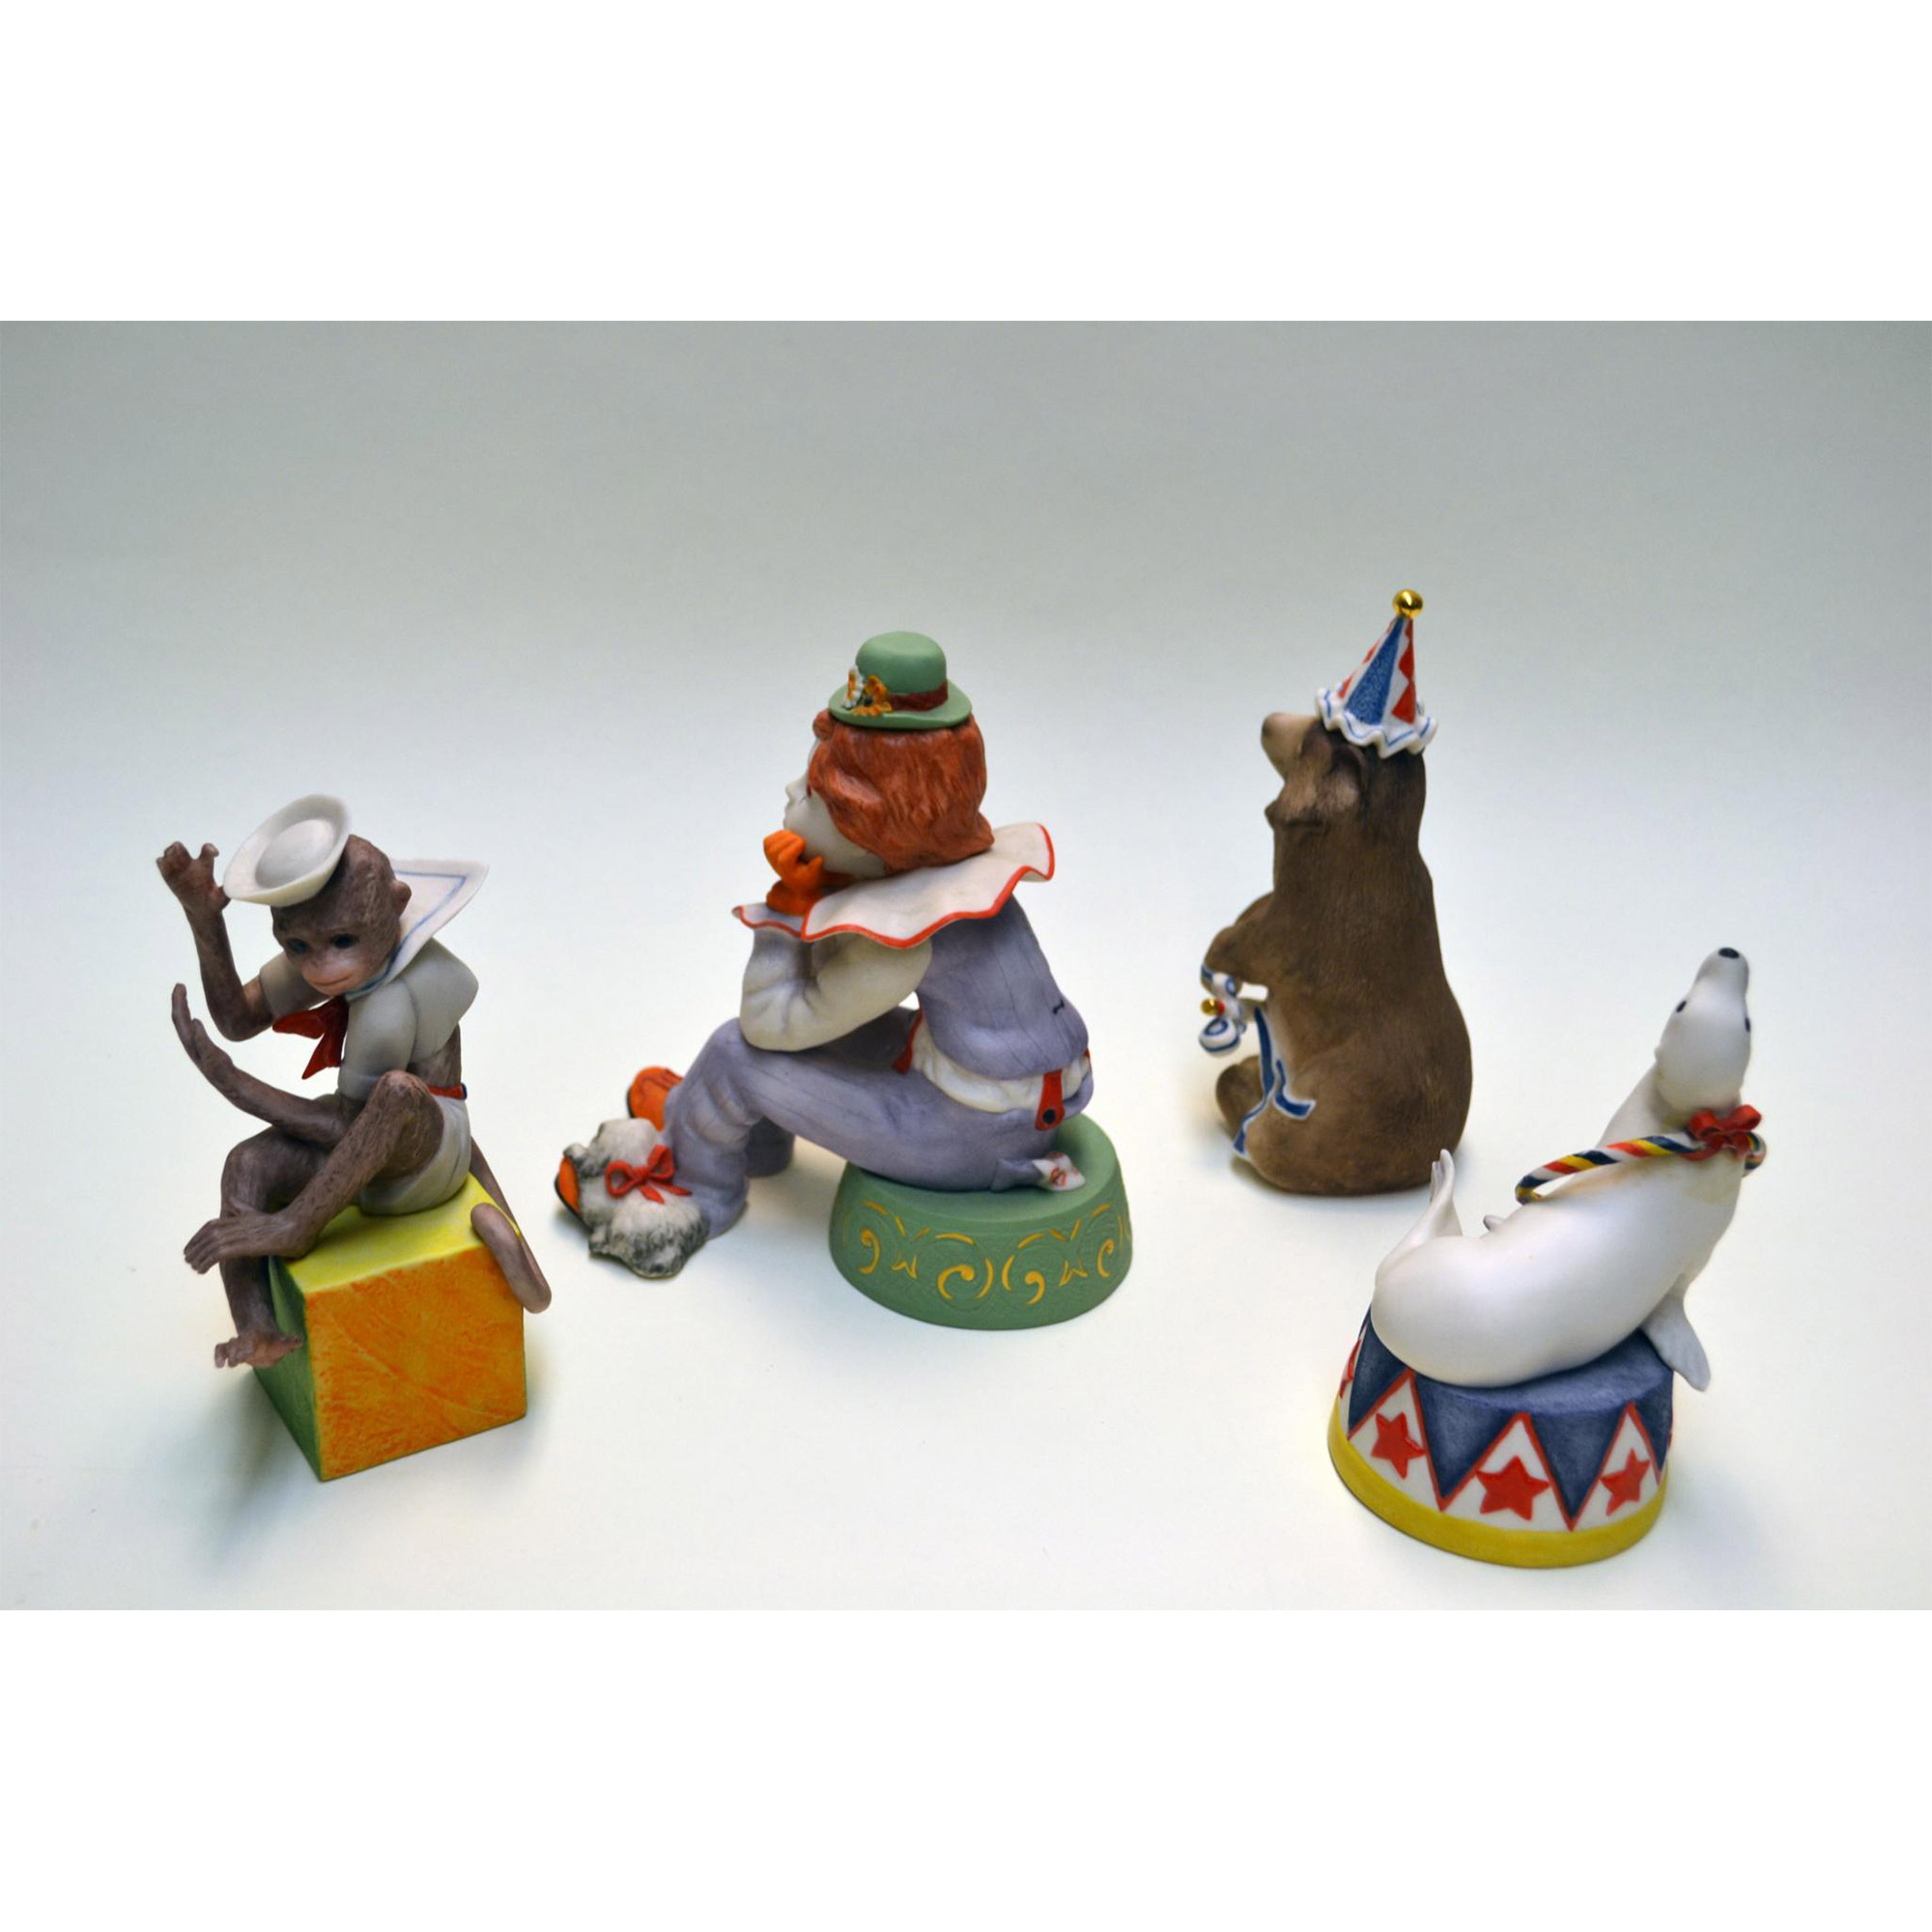 Cybis Porcelain Rumples The Pensive Clown, Barnaby The Bear, Sebastian The Seal And Bosun The Monkey - Image 3 of 5